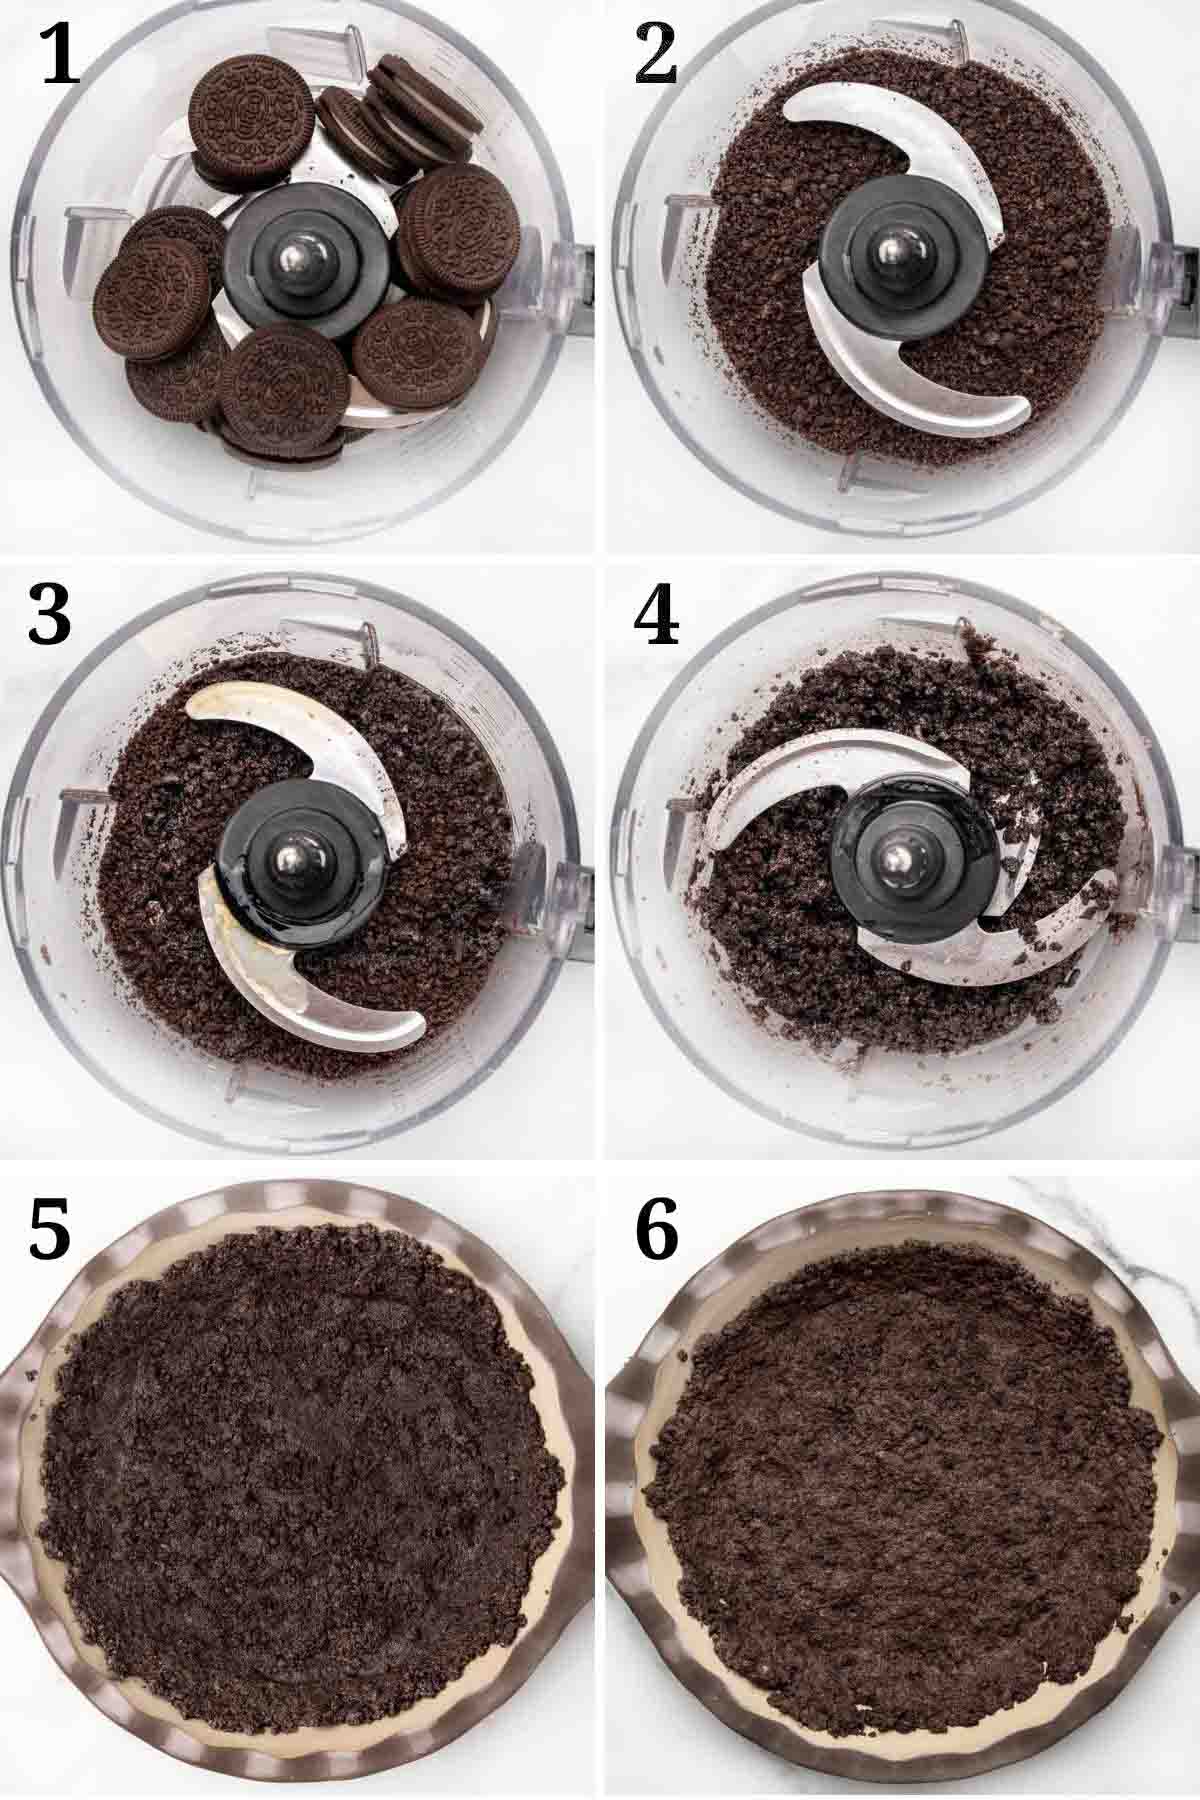 6 images showing how to make an oreo crust